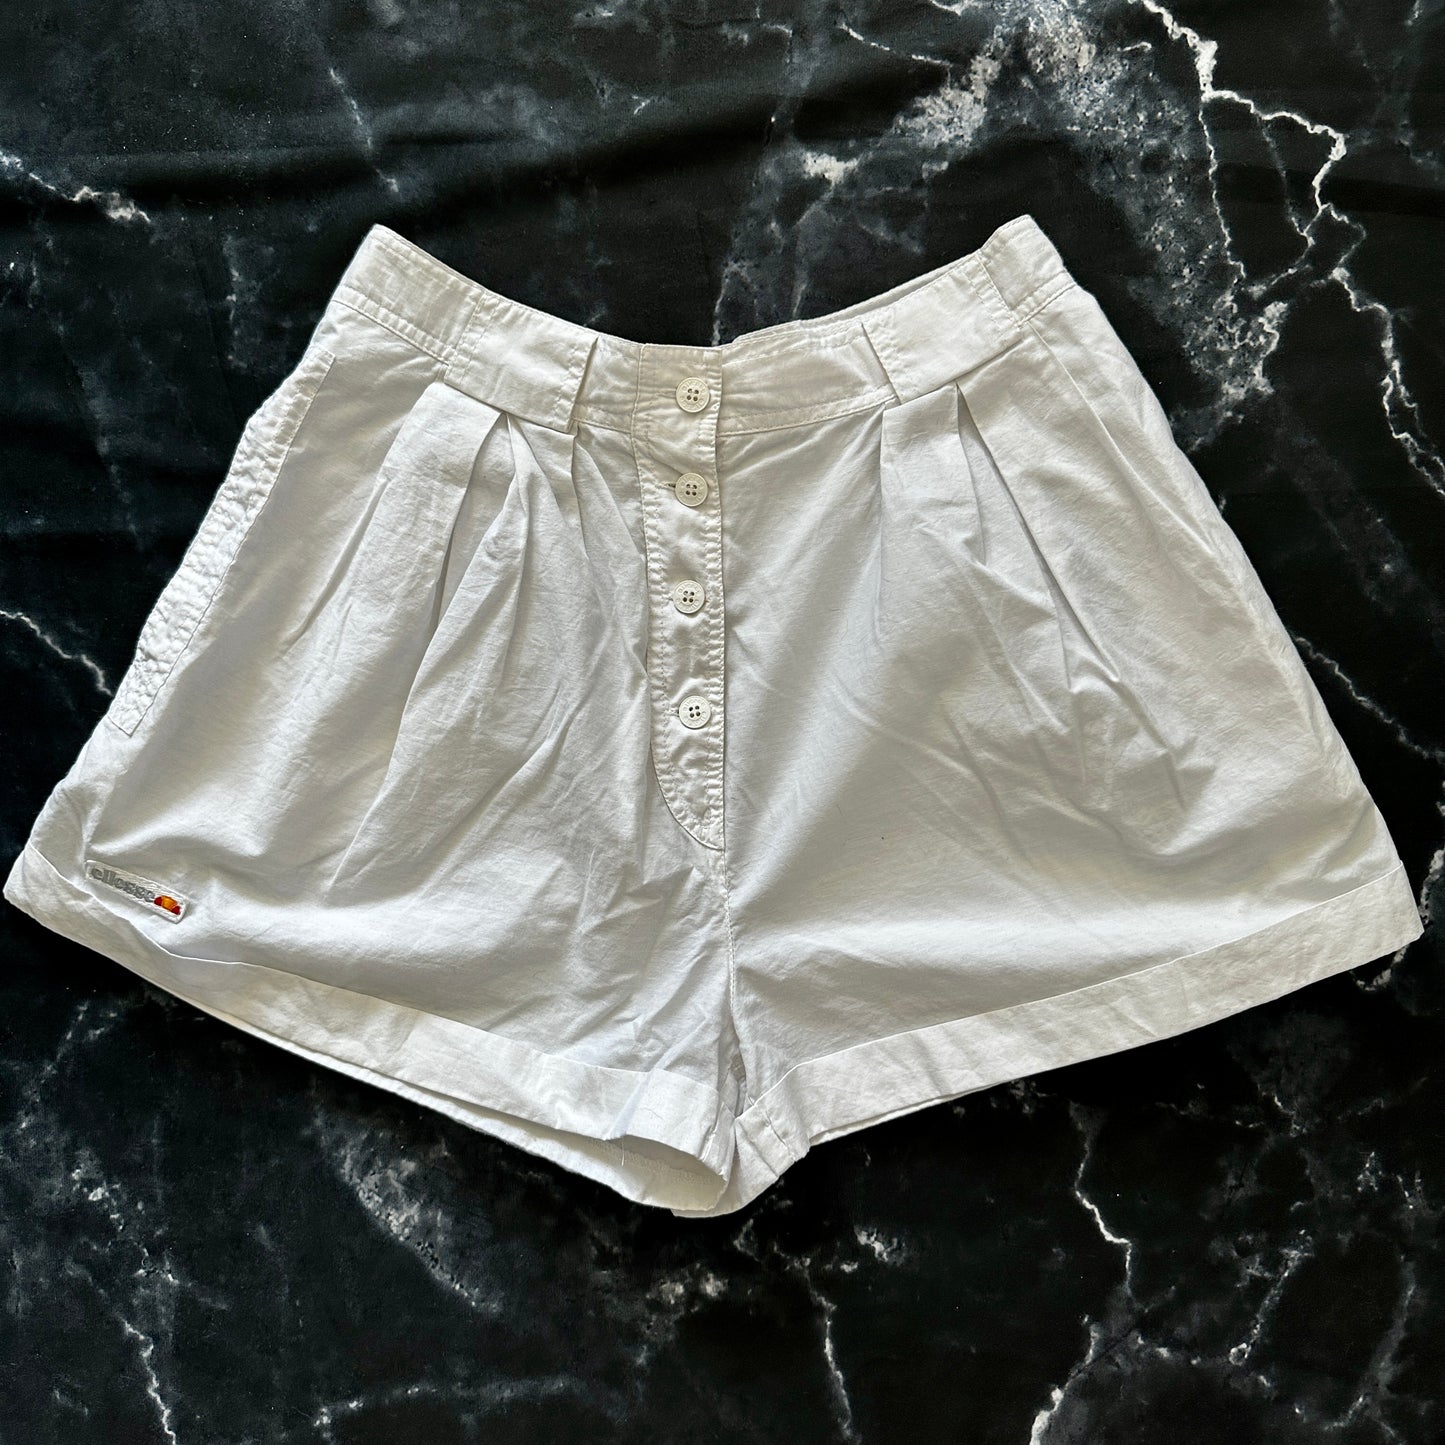 Ellesse 80s Tennis Shorts - 48 / S - Made in Italy